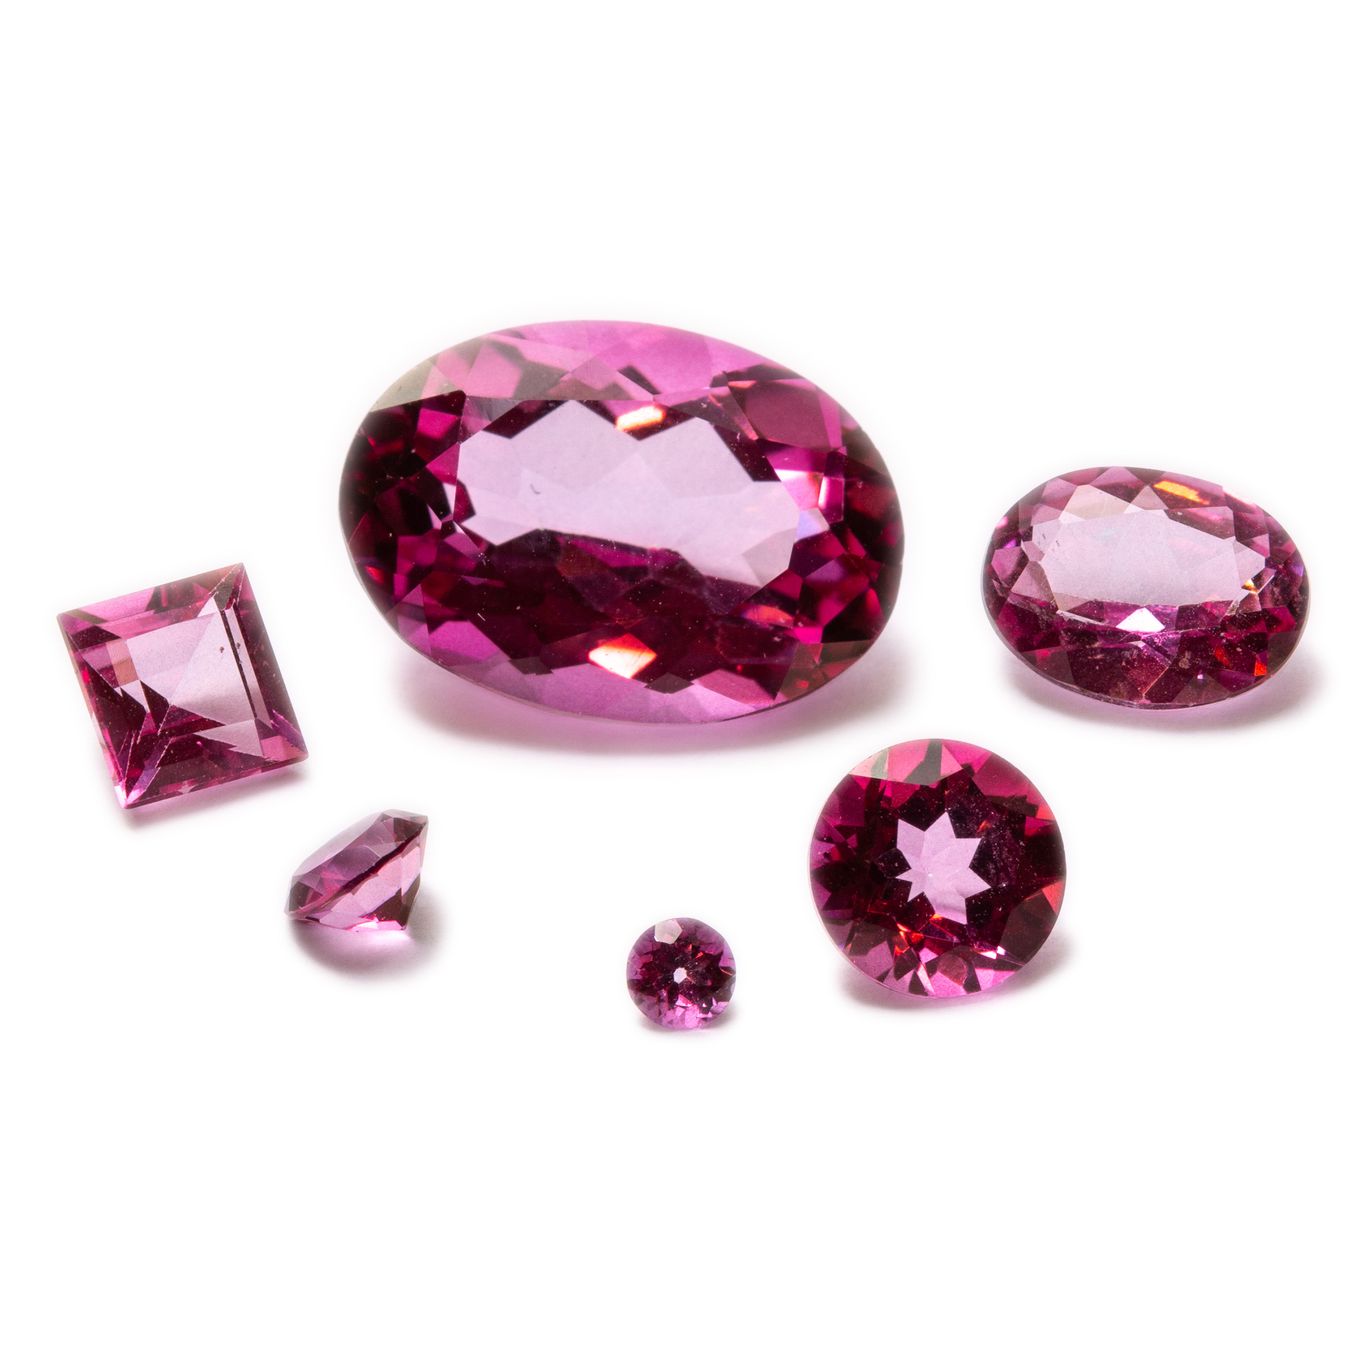 Pink Topaz Faceted Stones